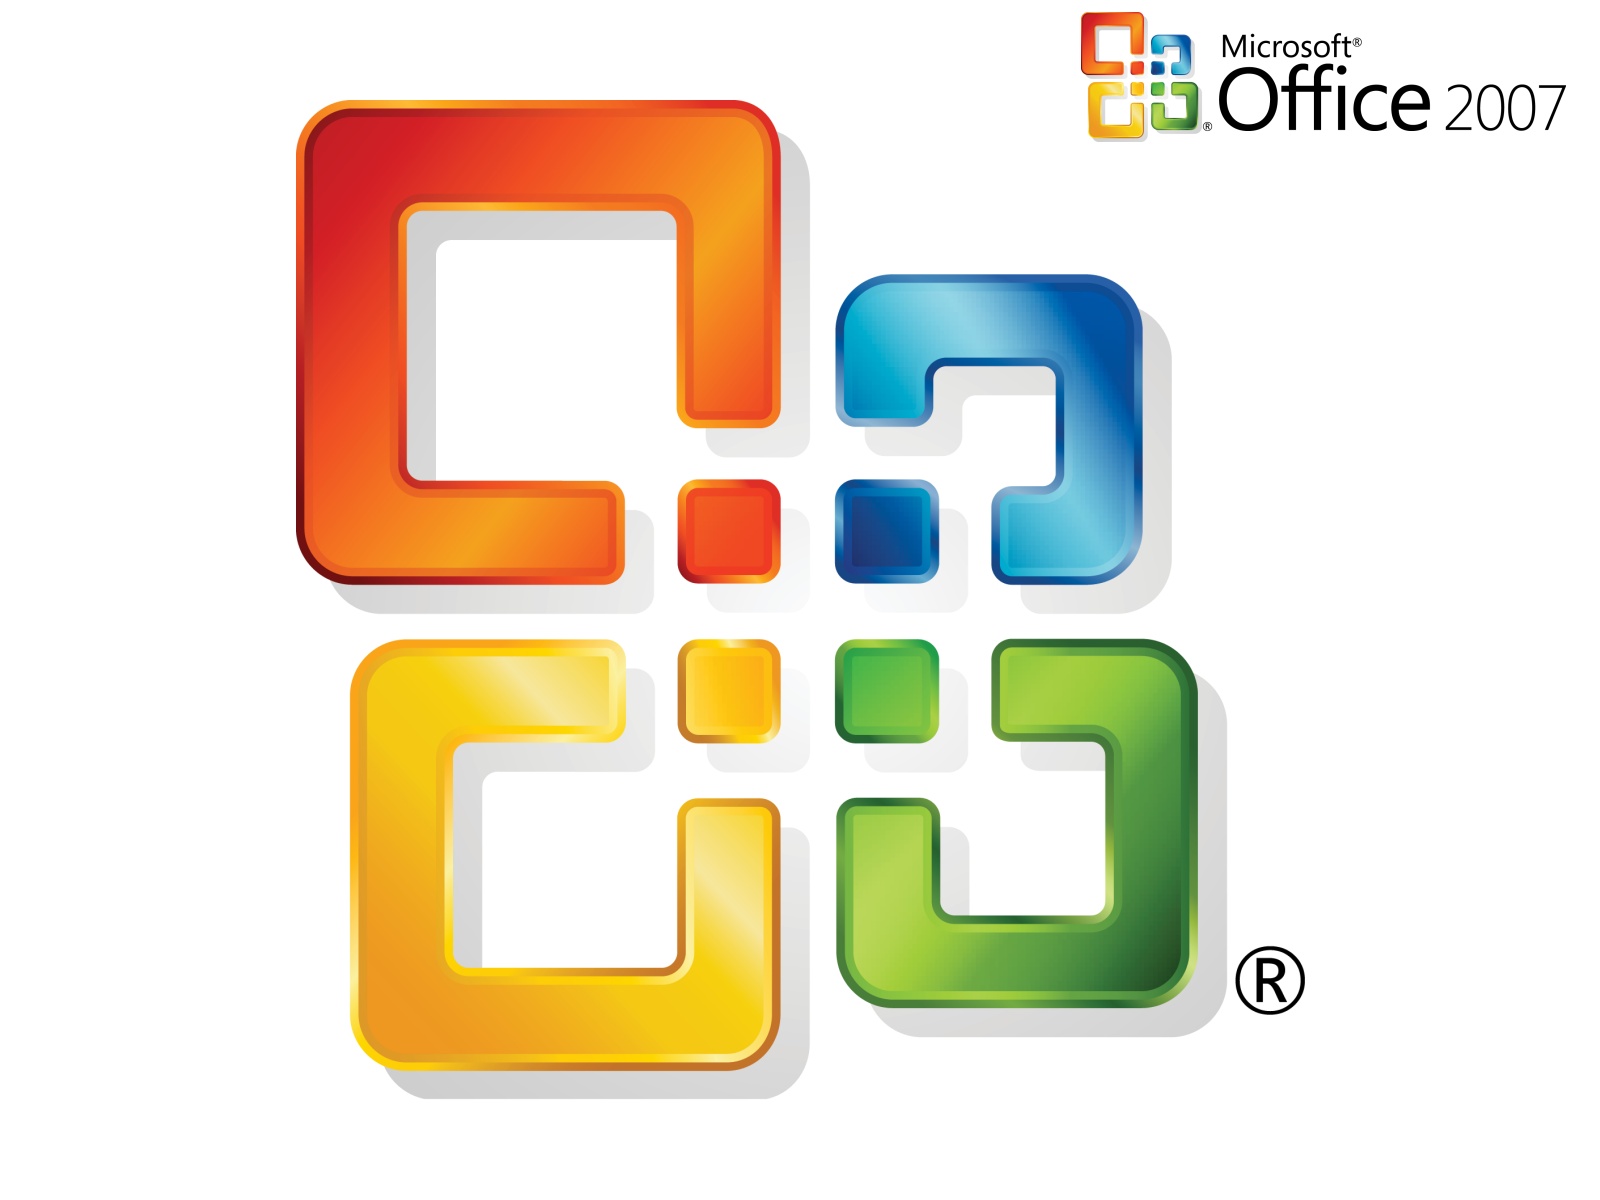 Microsoft Office Compatibility Pack for Word, Excel, and PowerPoint File Formats logo